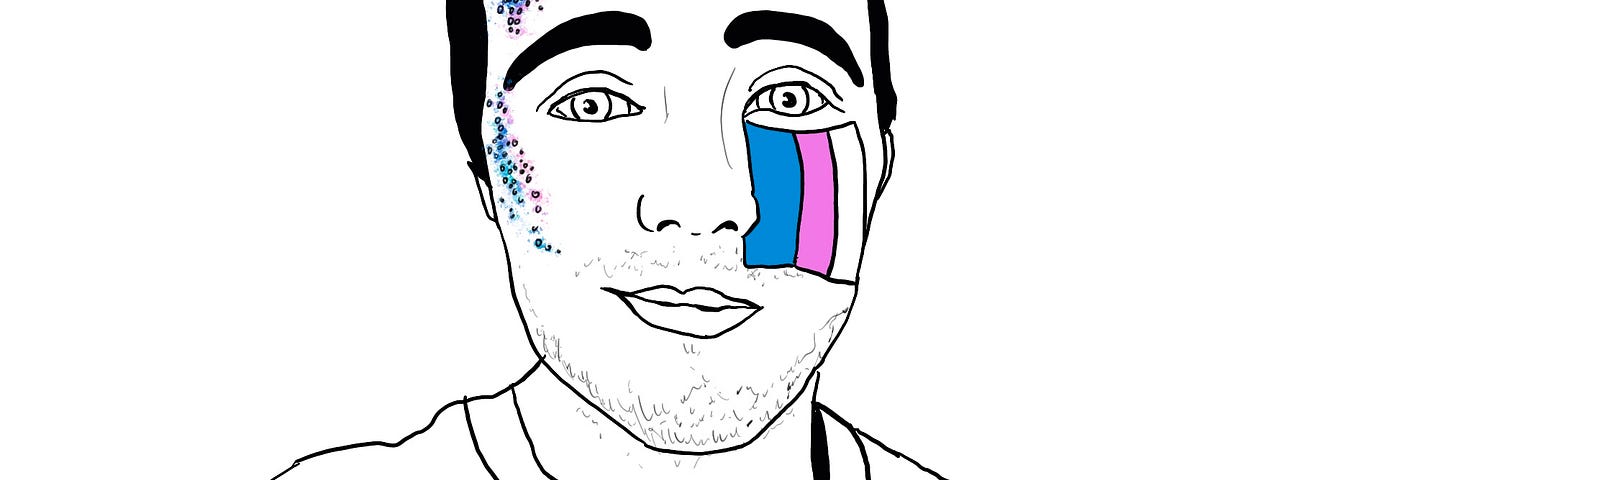 Illustration of author with transgender pride flag painted on their face